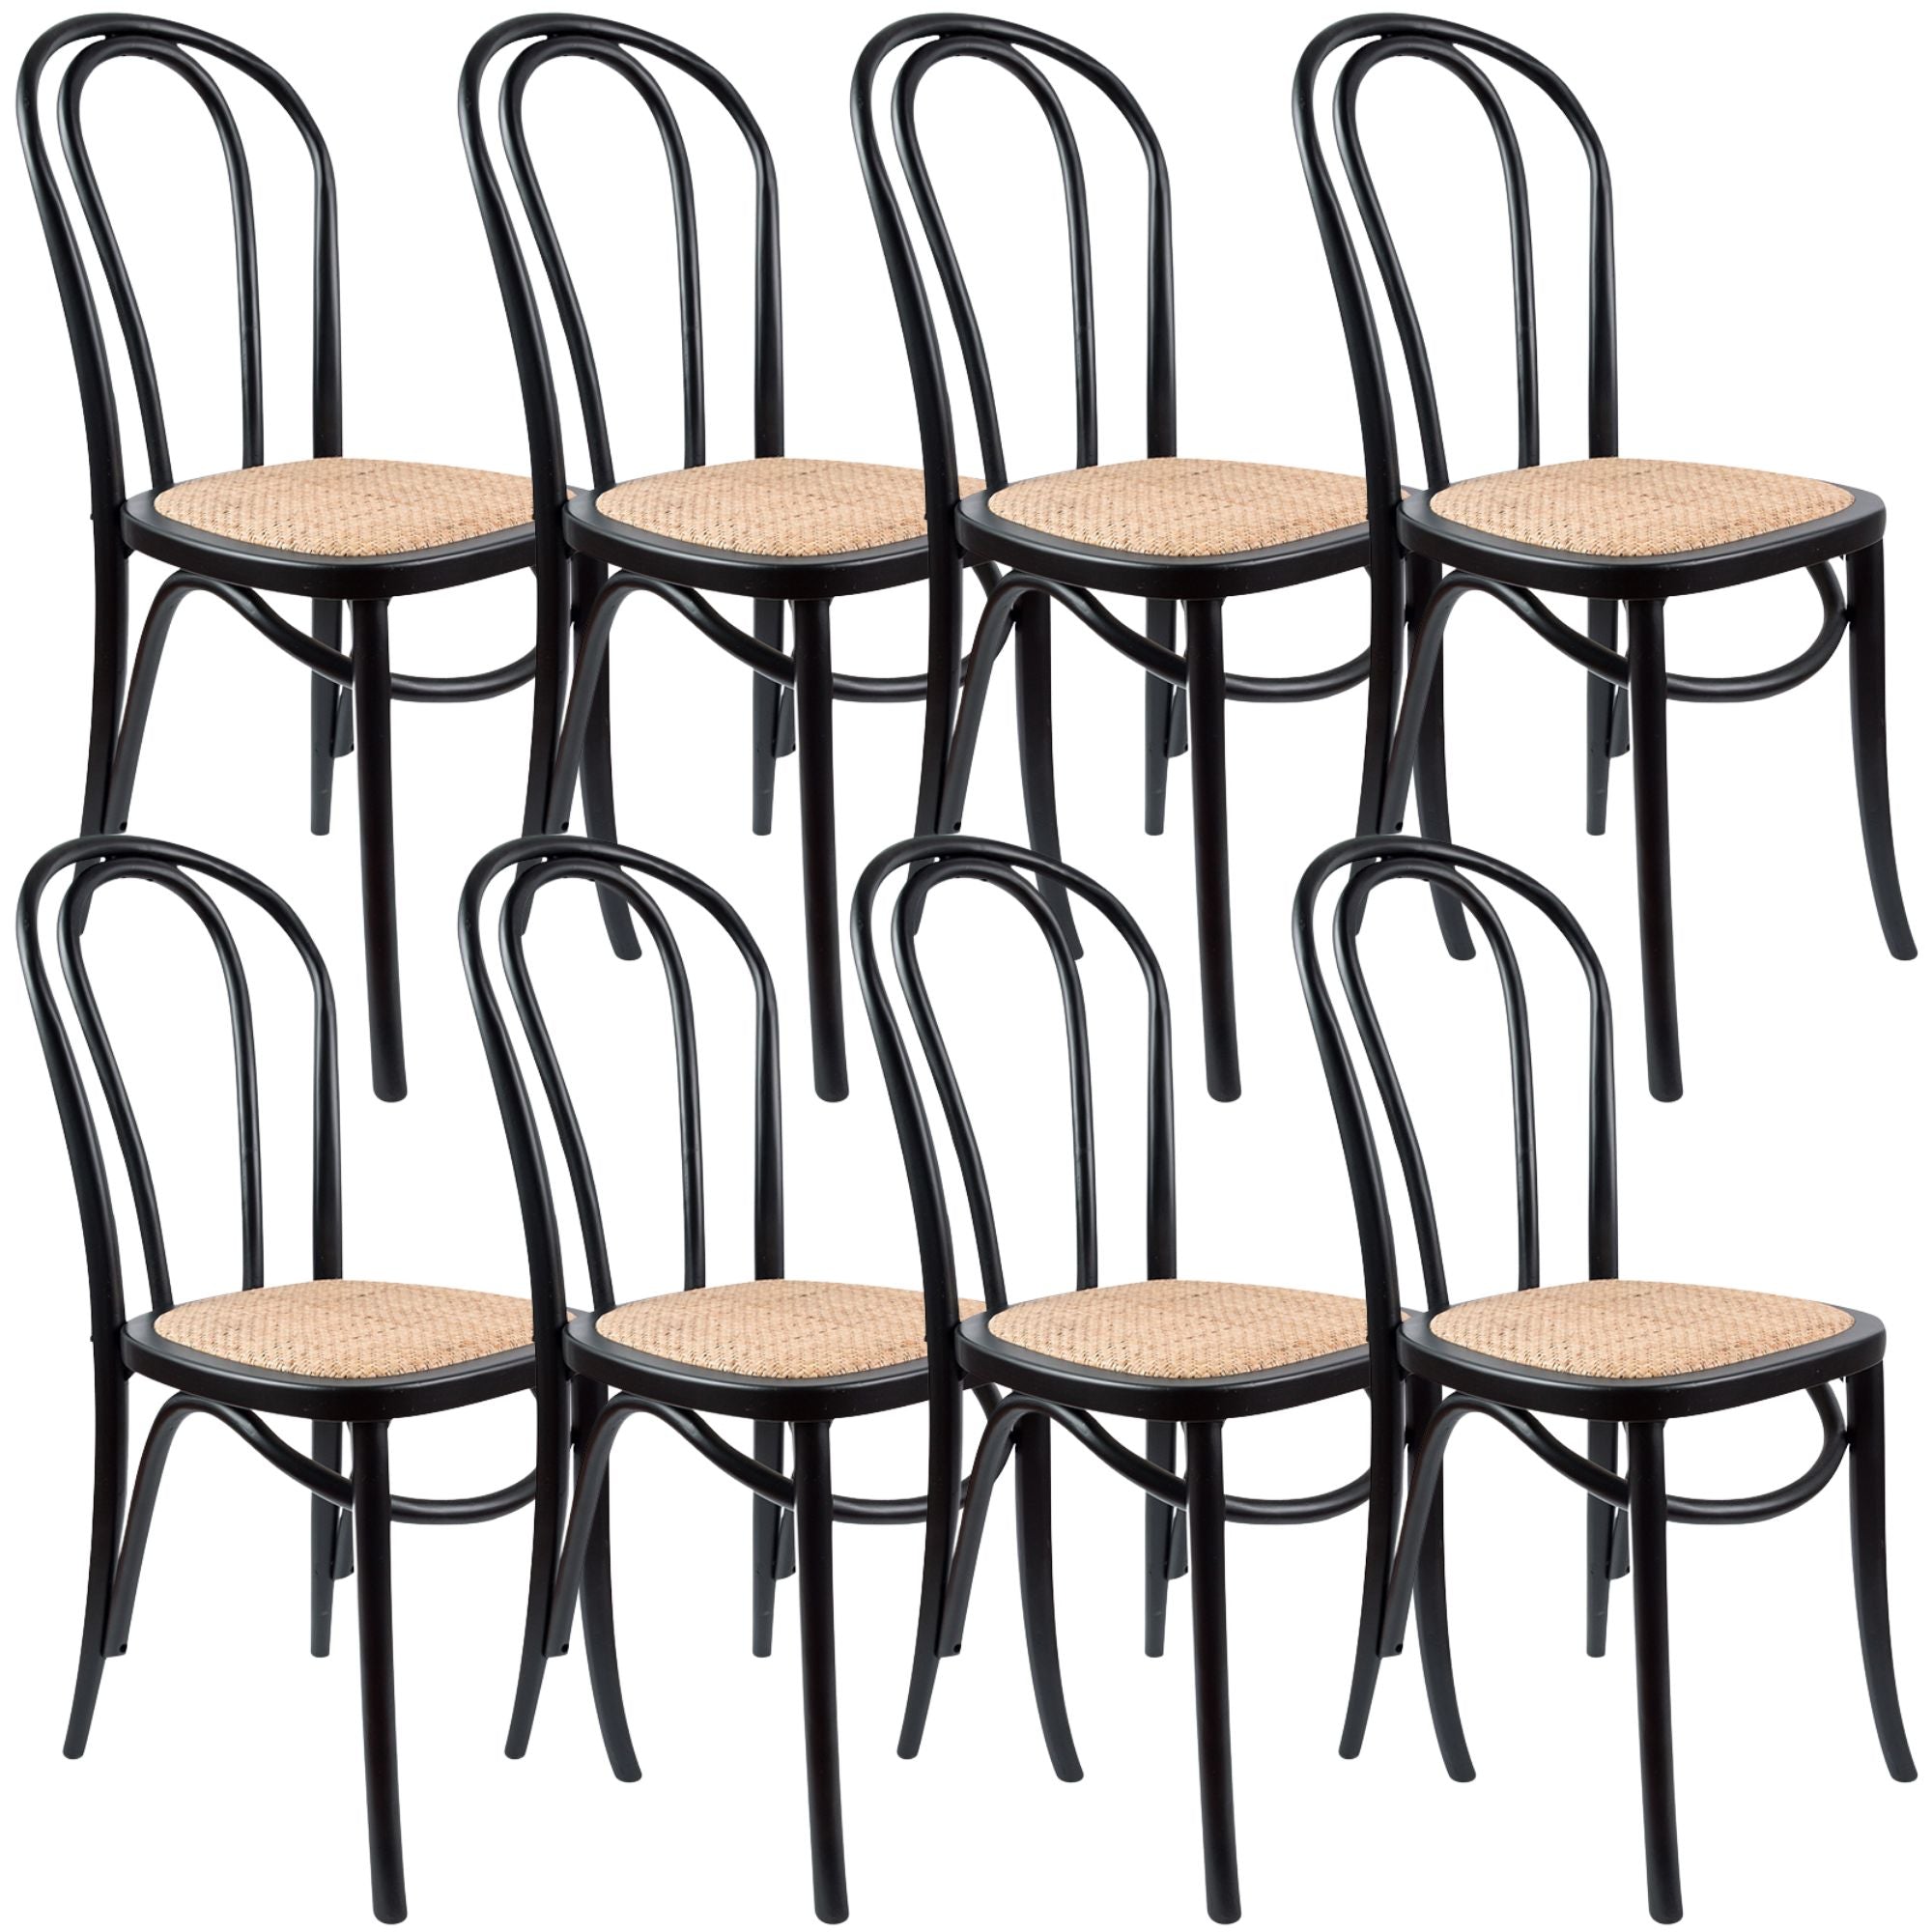 Azalea Arched Back Dining Chair 8 Set Solid Elm Timber Wood Rattan Seat - Black Deals499